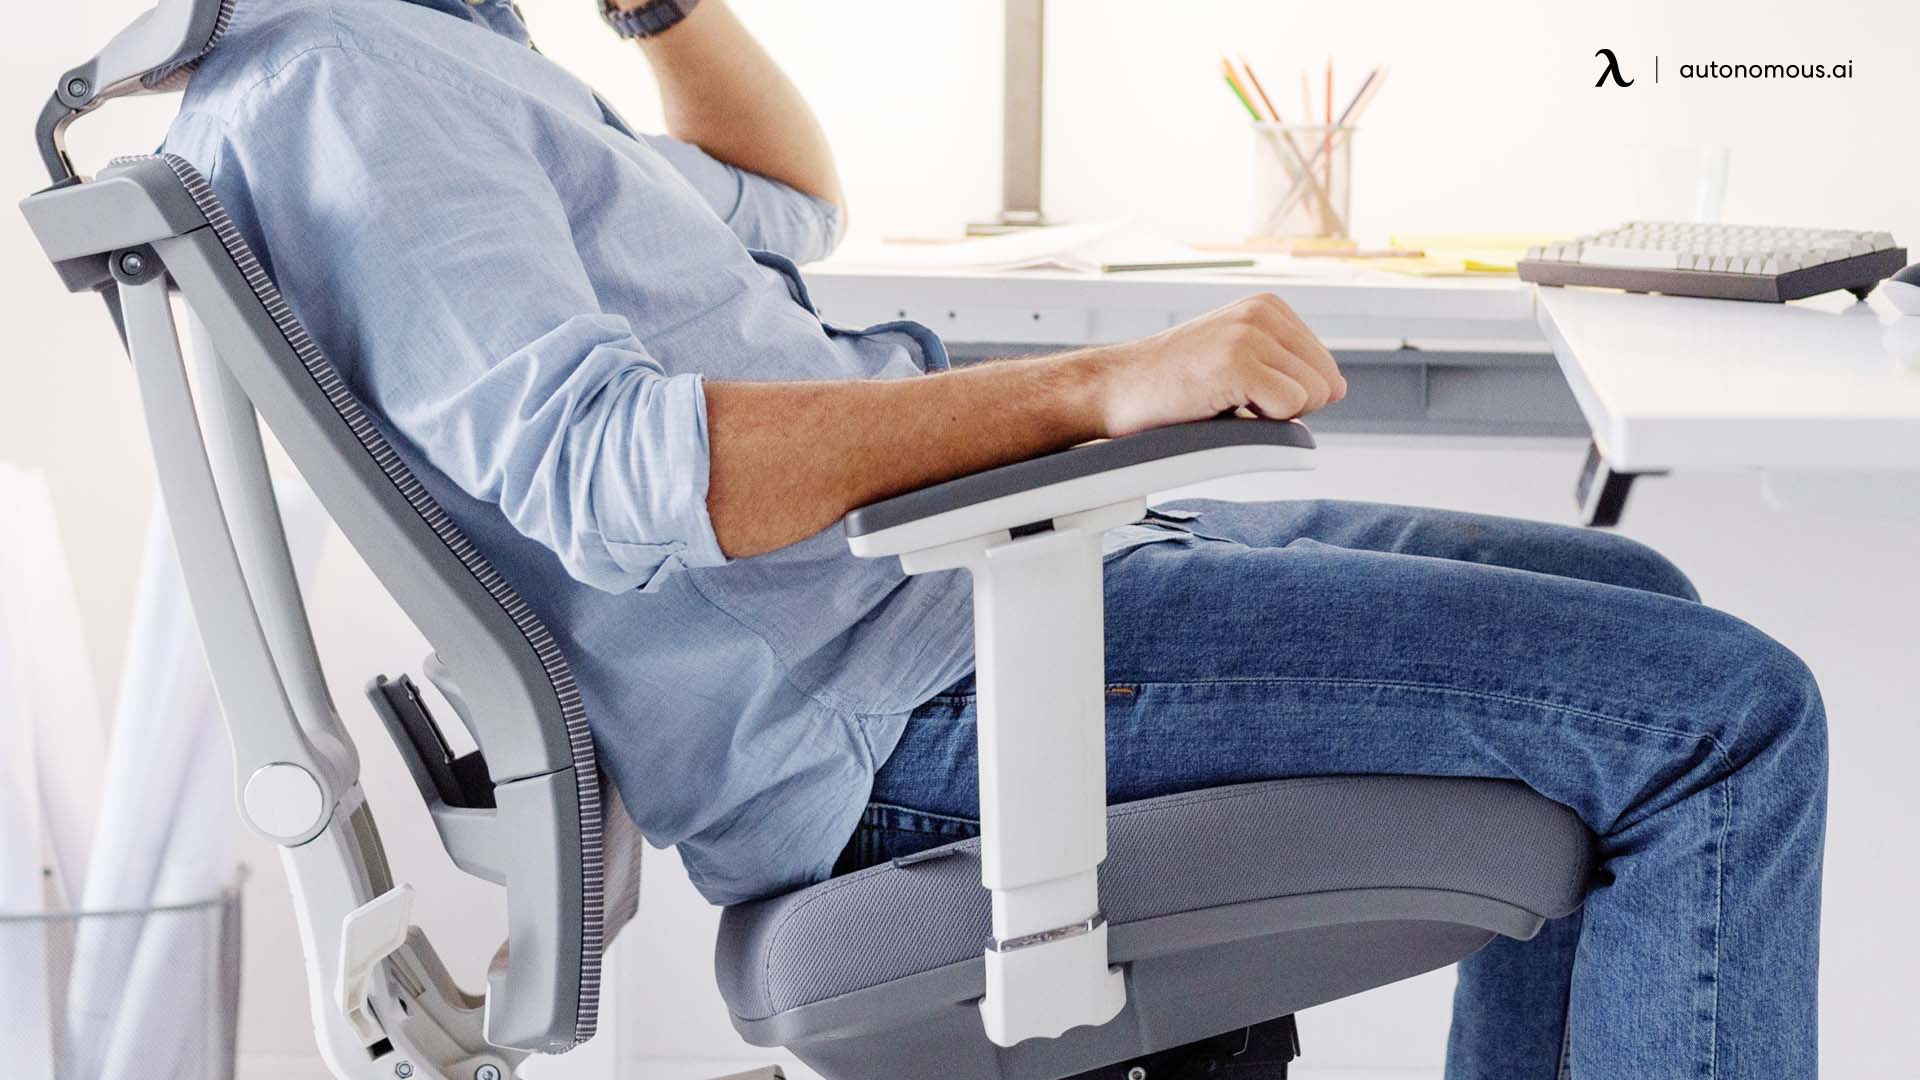 Armrests of working from home chair